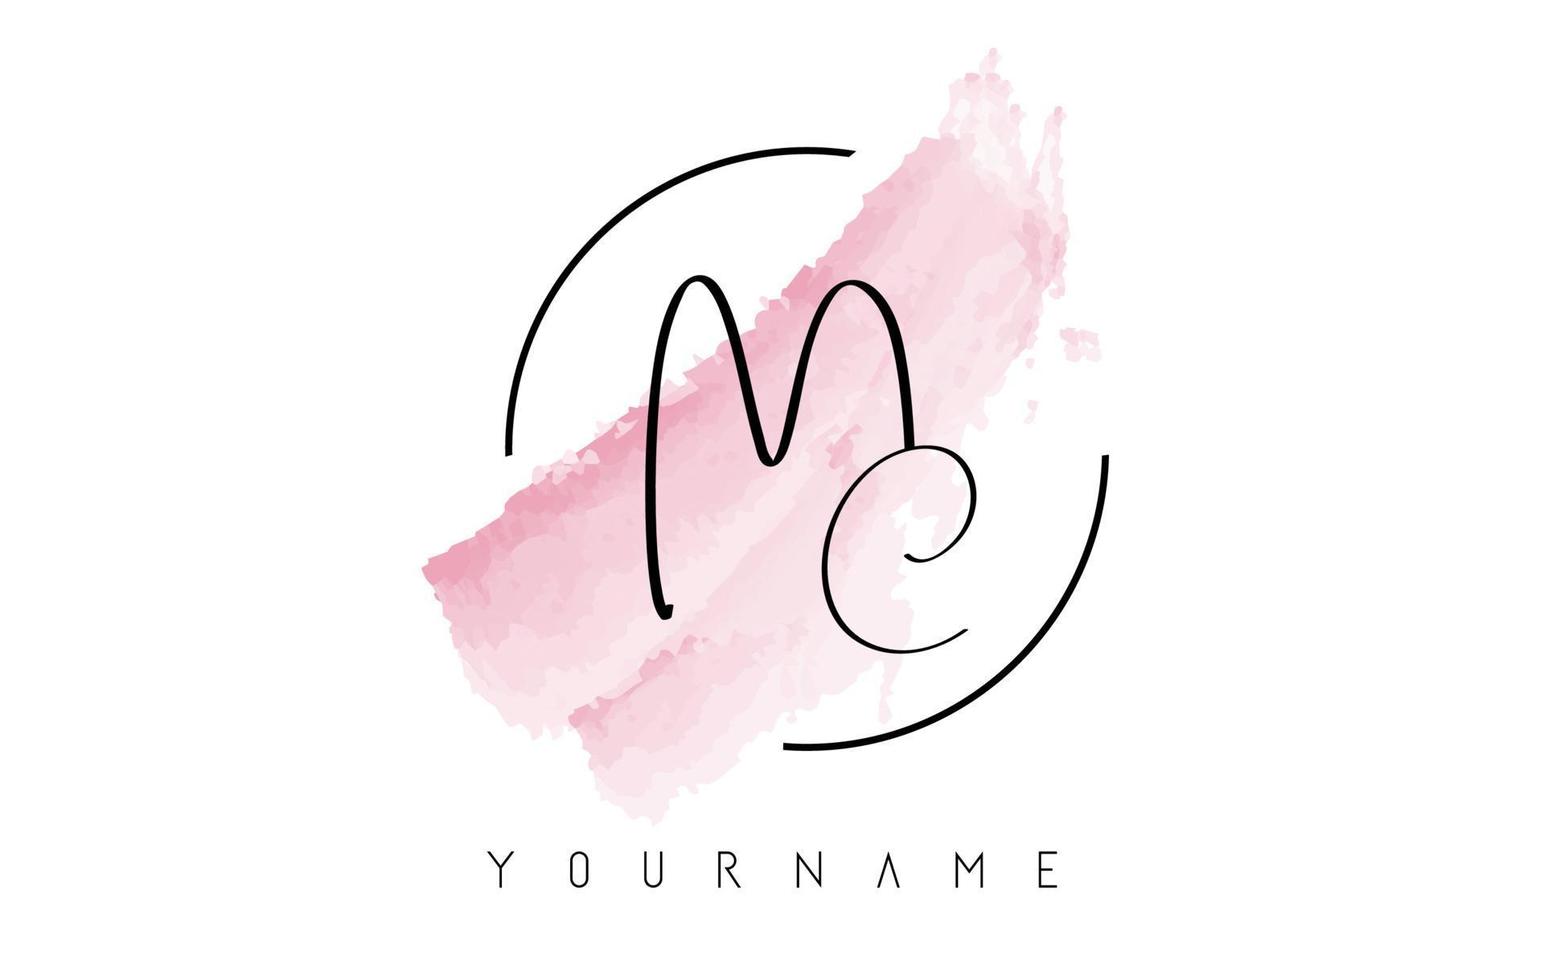 Handwritten MC M C Letters Logo with Pink Pastel Watercolor Brush Stroke Concept. vector